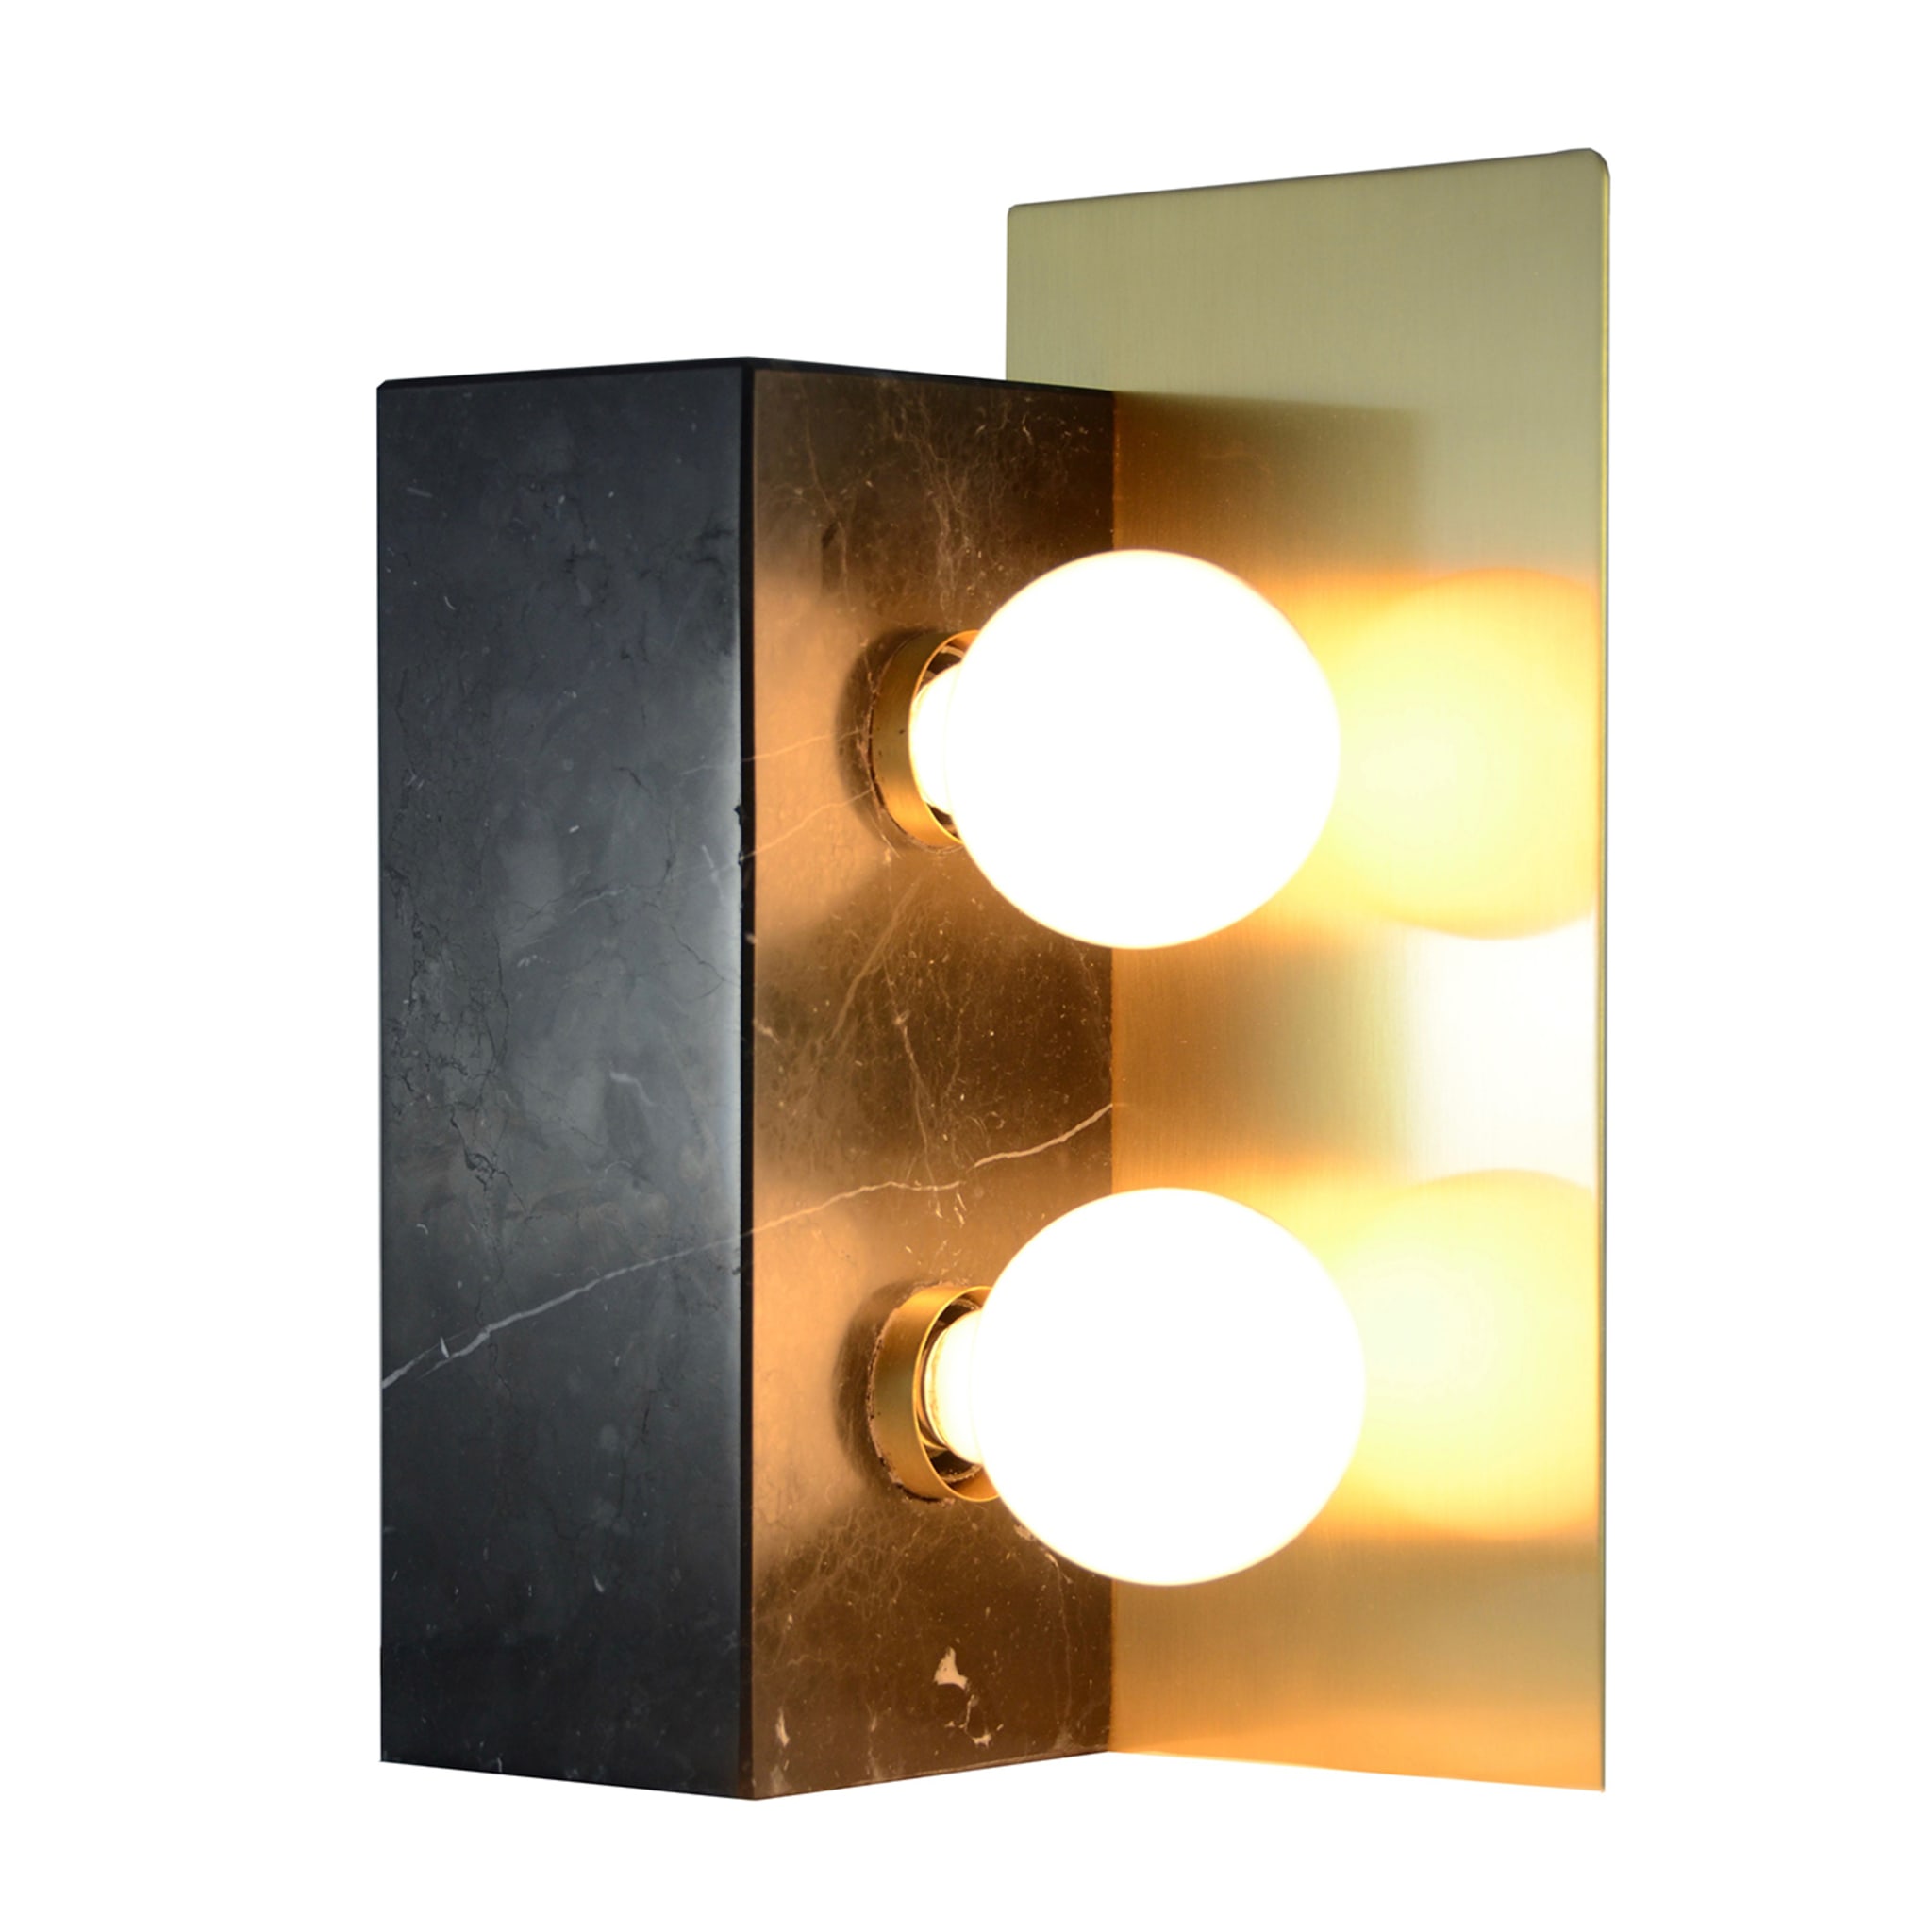 "Cubus" Table Lamp in Satin Marquinha Marble and Satin Brass - Alternative view 1